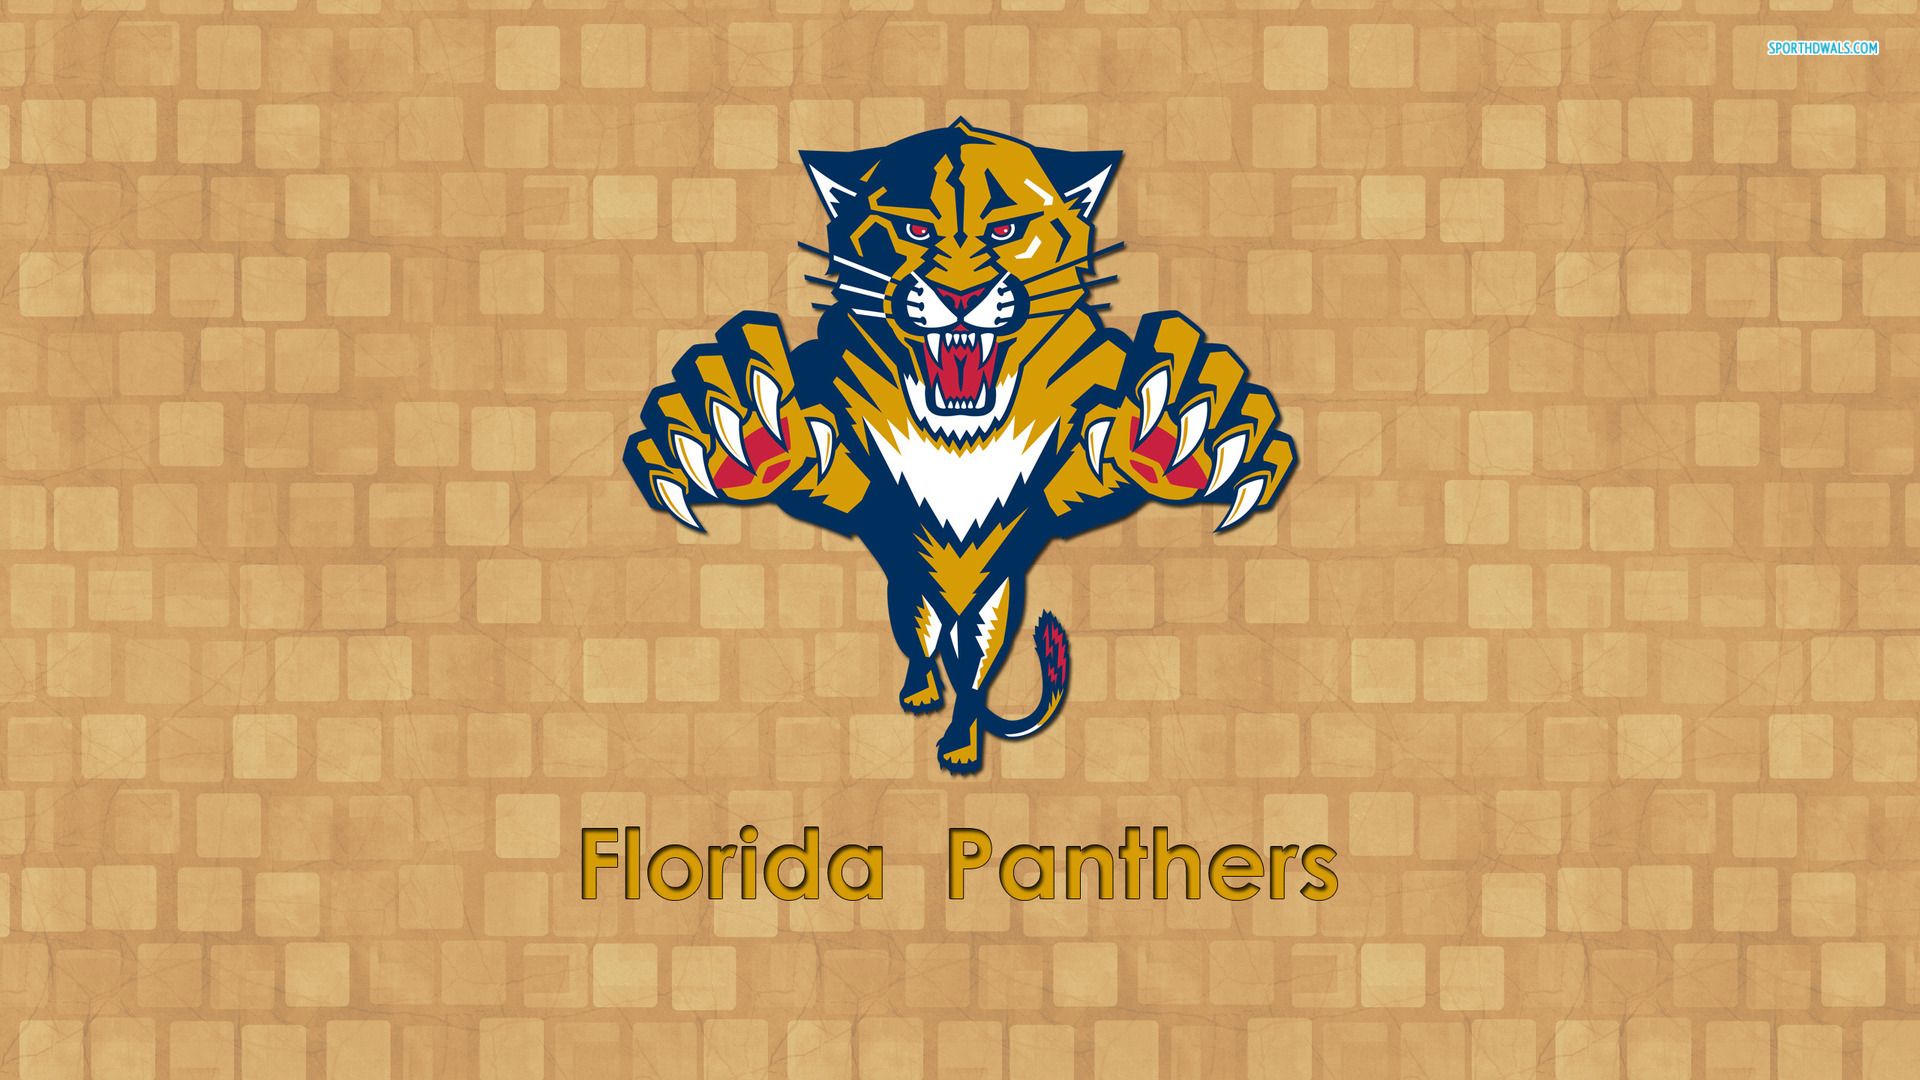 Florida Panthers, 1920x1080 HD Wallpaper and FREE Stock Photo